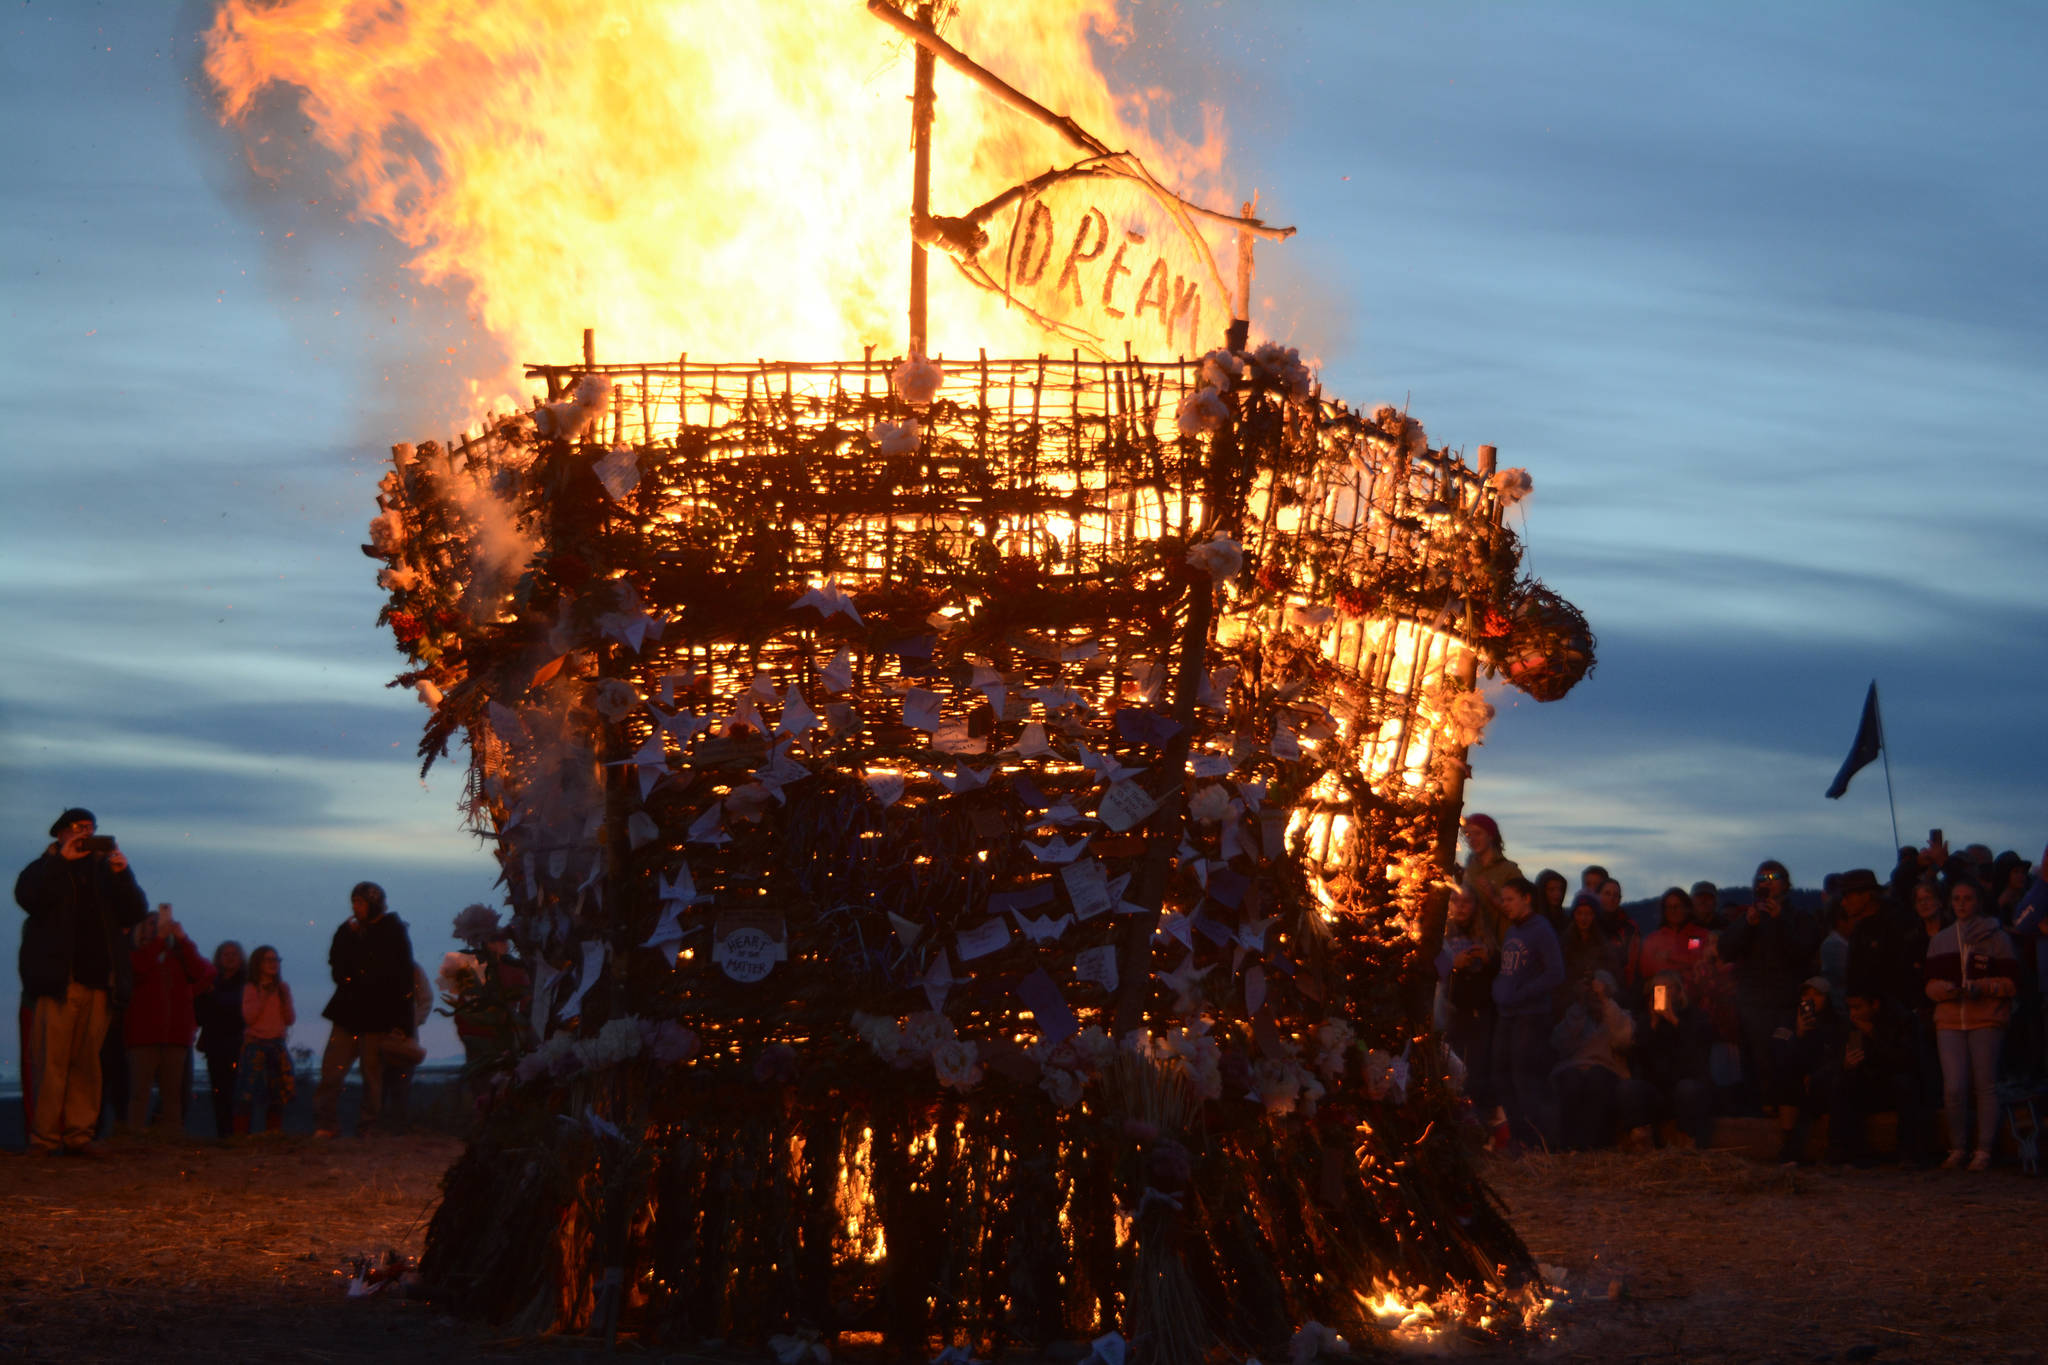 The 2018 Burning Basket, Dream, catches fire on Sept. 9, 2018 at Mariner Park in Homer, Alaska. (Photo by Michael Armstrong/Homer News)